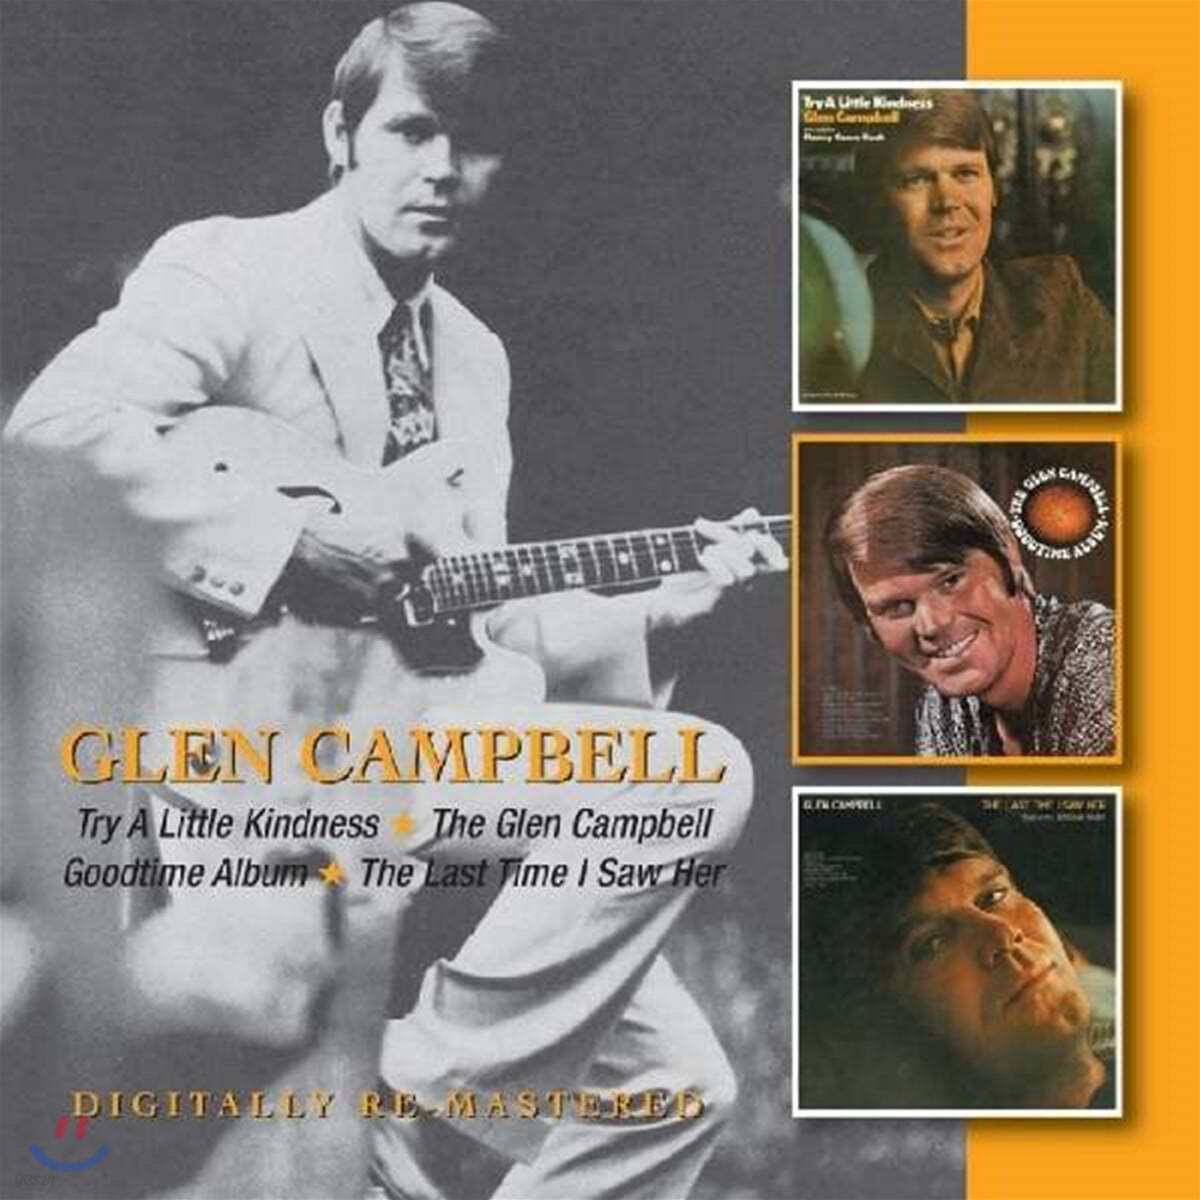 Glen Campbell (글렌 캠벨) - Try A Little Kindness / The Glen Campbell Goodtime Album / The Last Time I Saw Her 